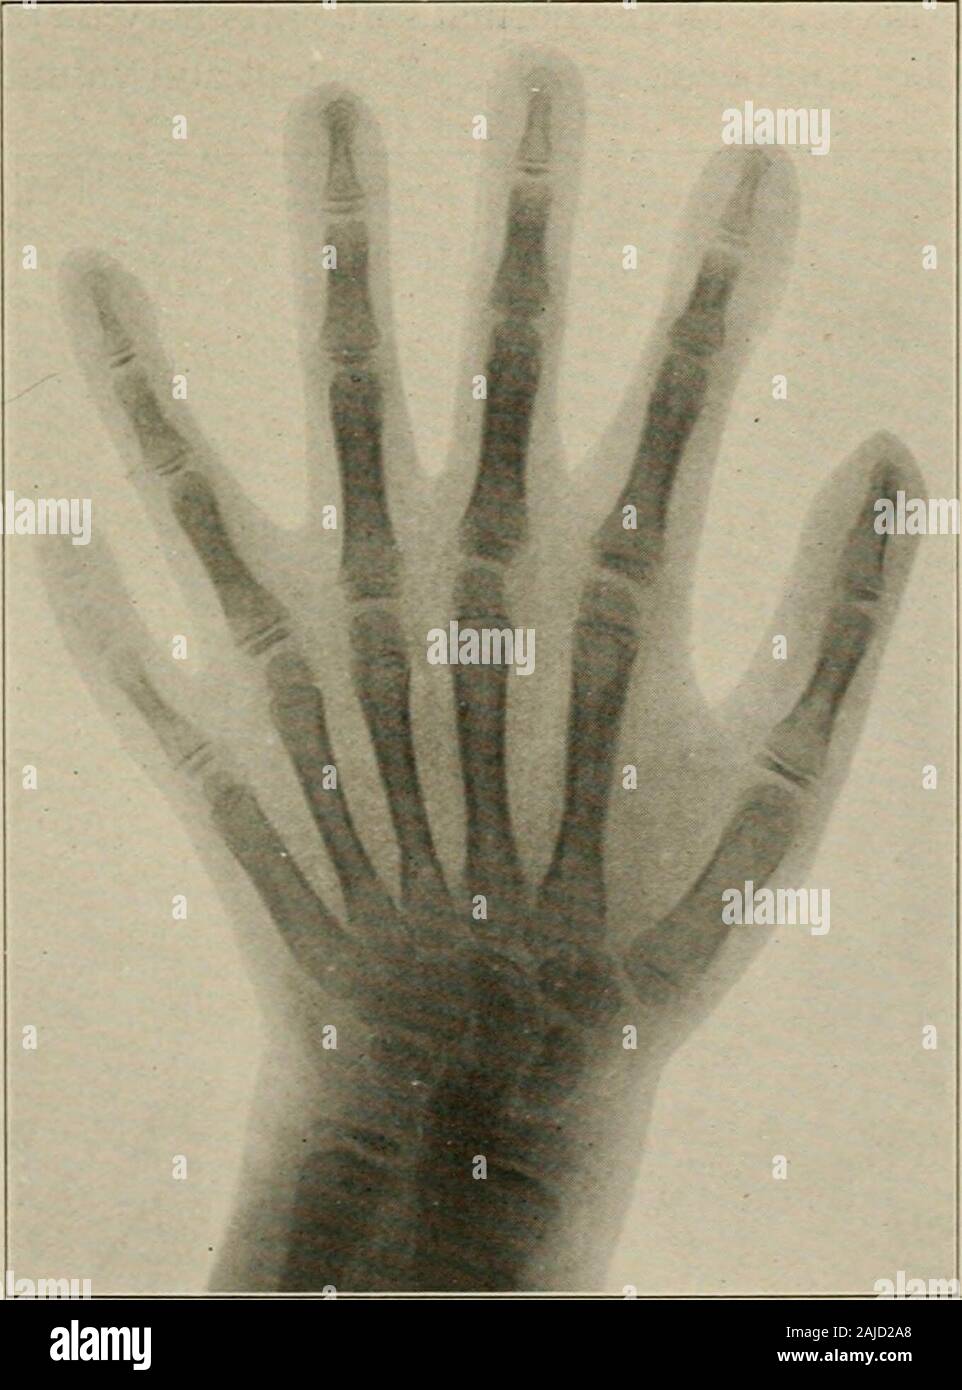 Plastic surgery; its principles and practice . Fig. 183 .—Supernumerarythumb.—Amputation with propertrimming of the projecting articu-lation was done. Fig. 184.—Polydactylism. (X-ray Xo.35961).—Double little toe.. Fig. 185.—Polydactylism. (A-ray No. 22252).—Five fingers and a thumb, all of which functionate normally. ^ 236 PLASTIC SURGERY The deformity may be unilateral or bilateral, or the hand and footon the same side may be involved. As many as 13 fingers on each handand 12 toes on each foot have been reported. The fifth finger is mostoften double. Stock Photo